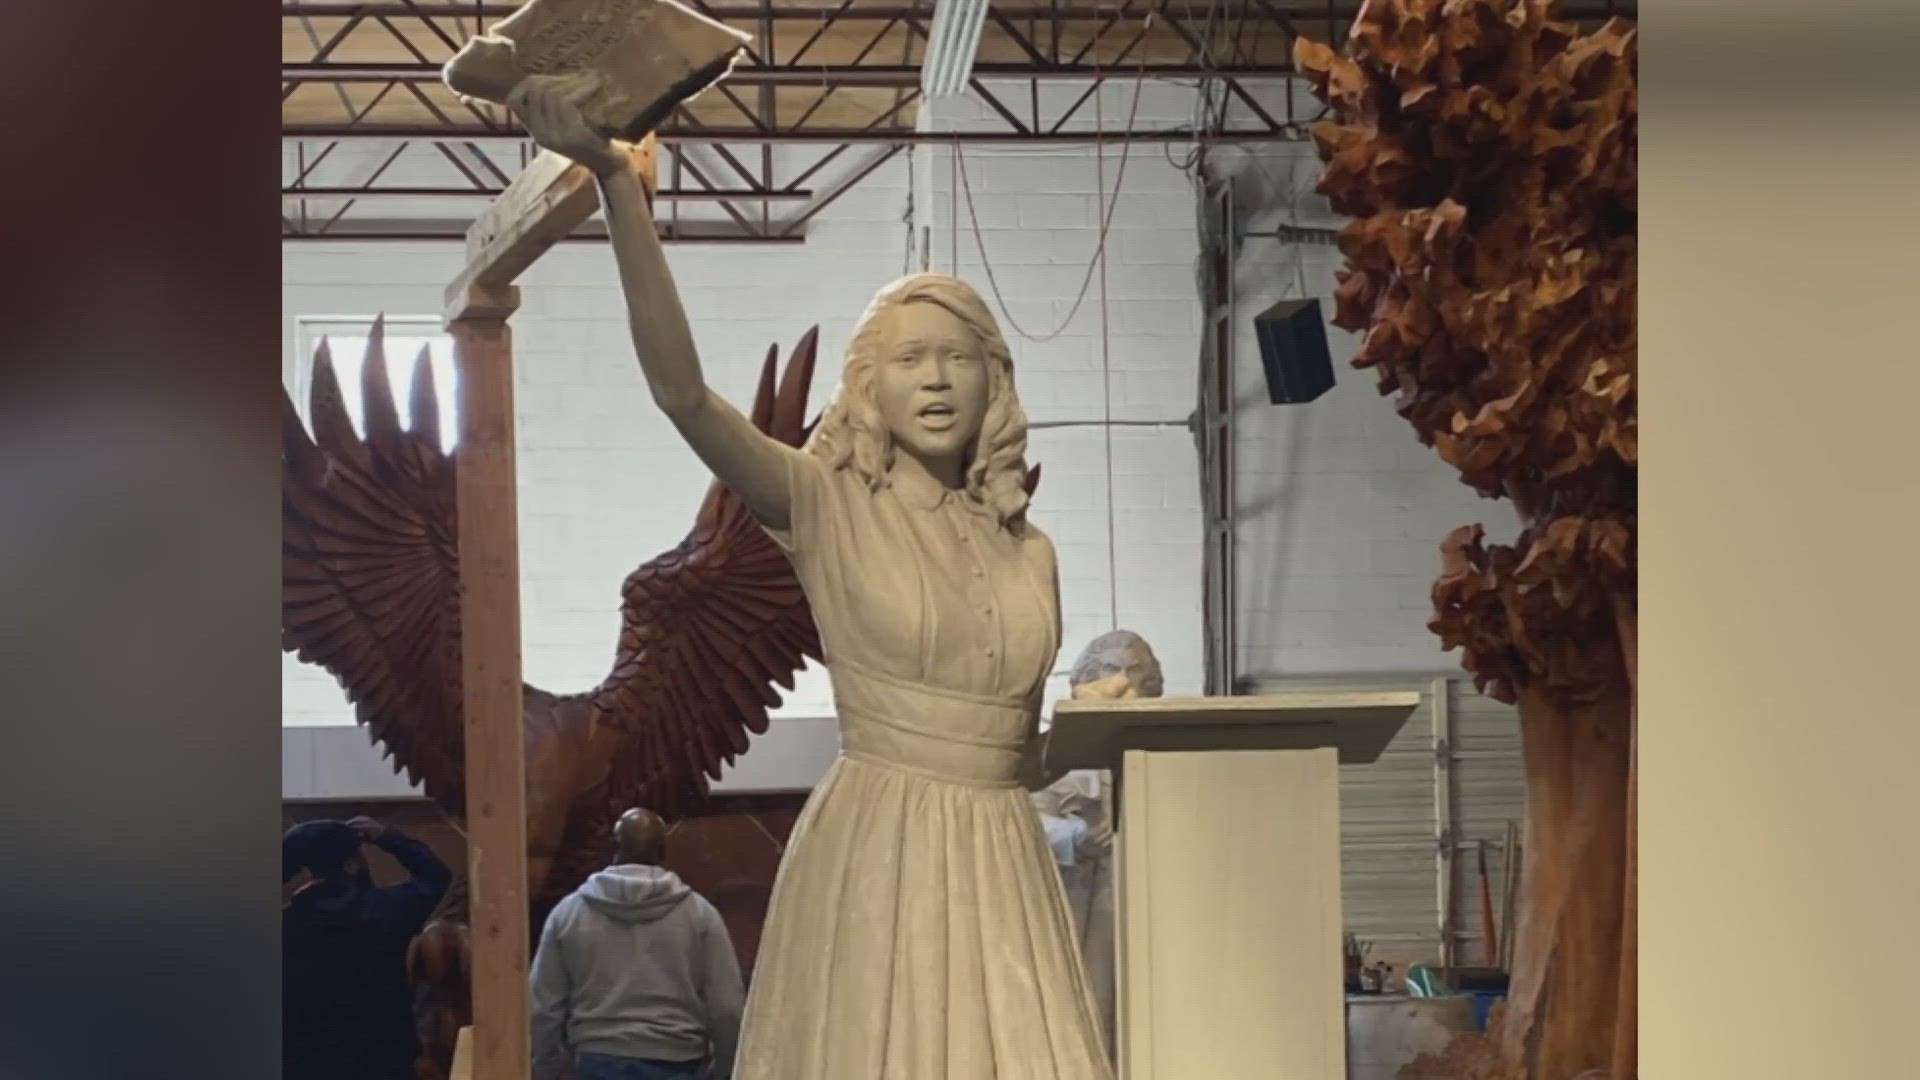 A state commission in Richmond has approved a full-scale model of the Johns statue.